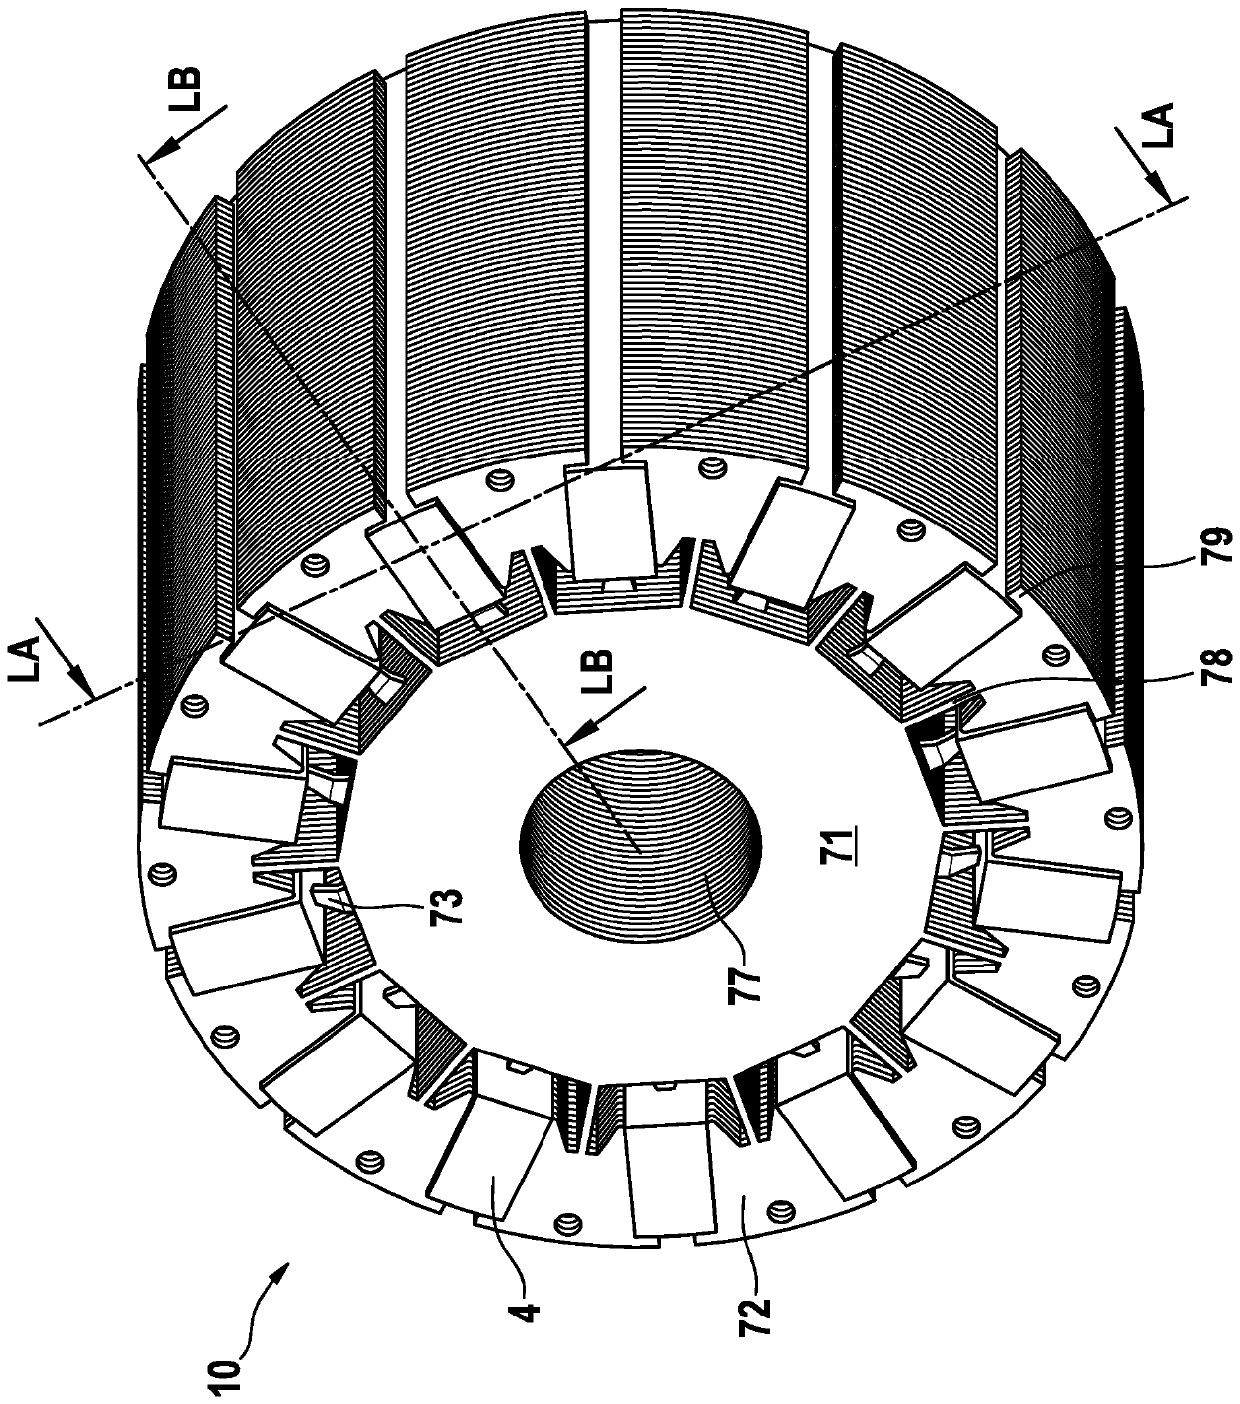 Electric machine with corresponding at least two clamping lugs for fixing permanent magnets